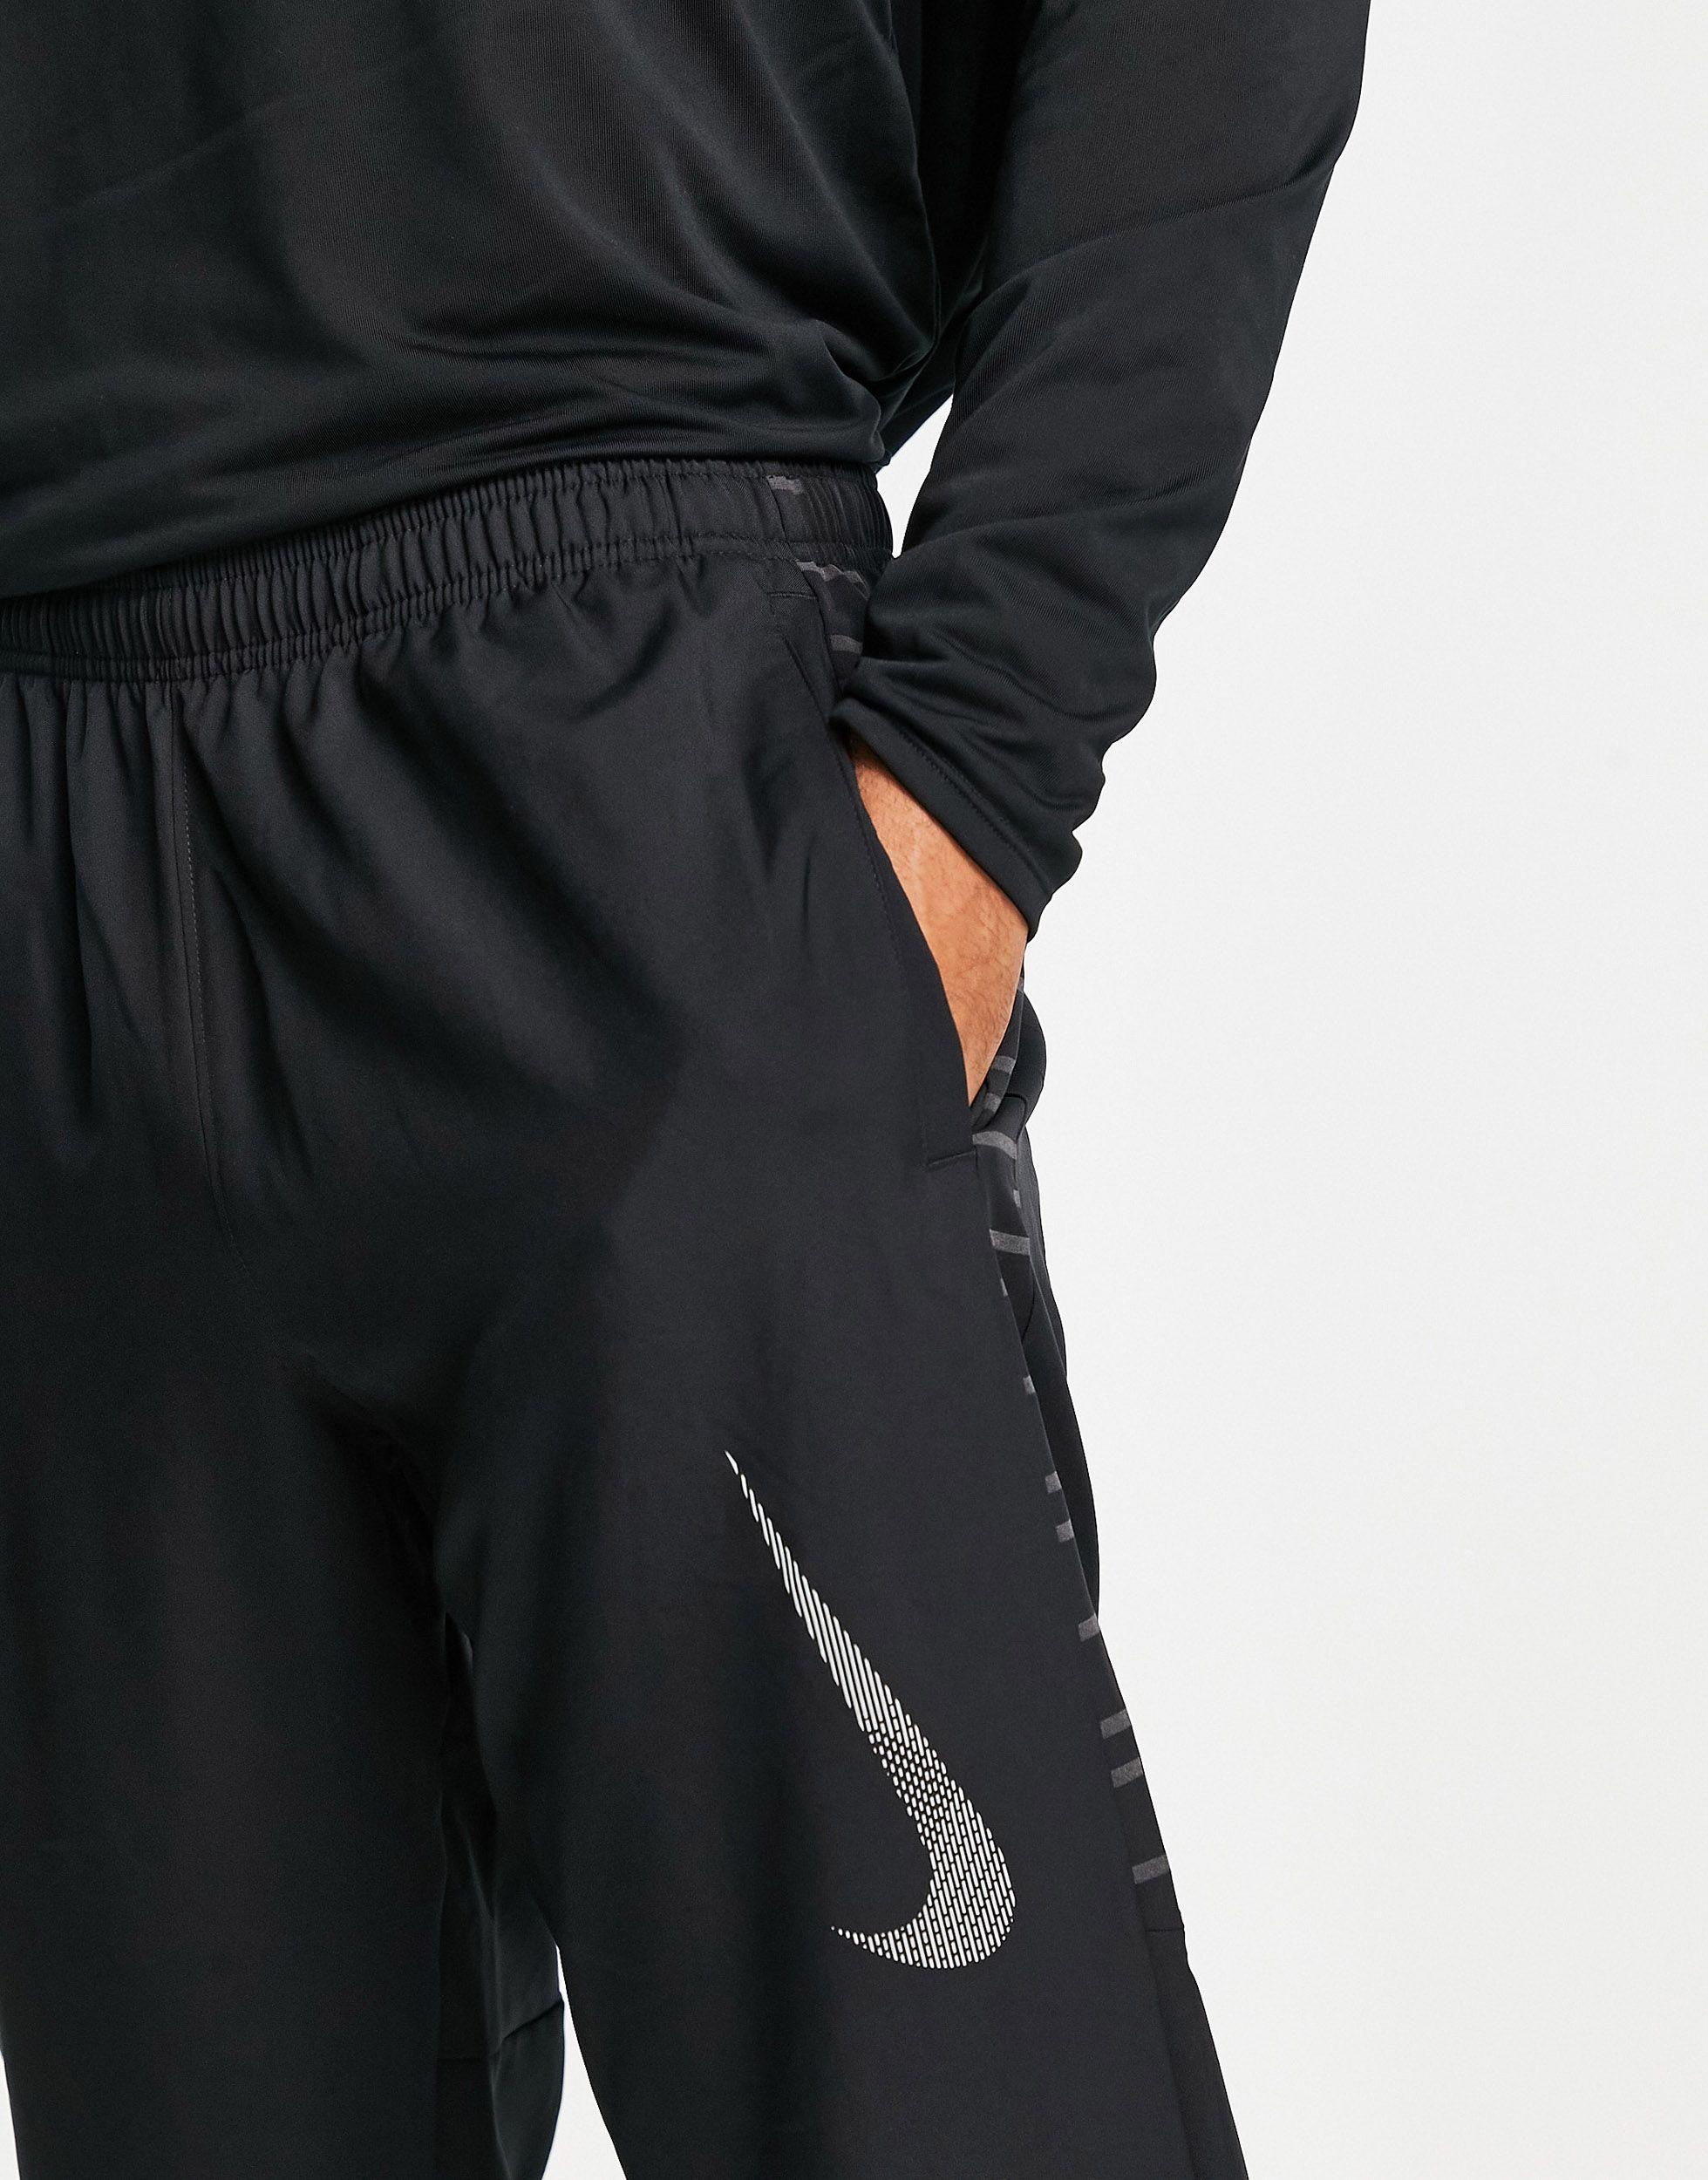 Nike Run Division Challenger Flash Woven jogger in Black for Men - Lyst